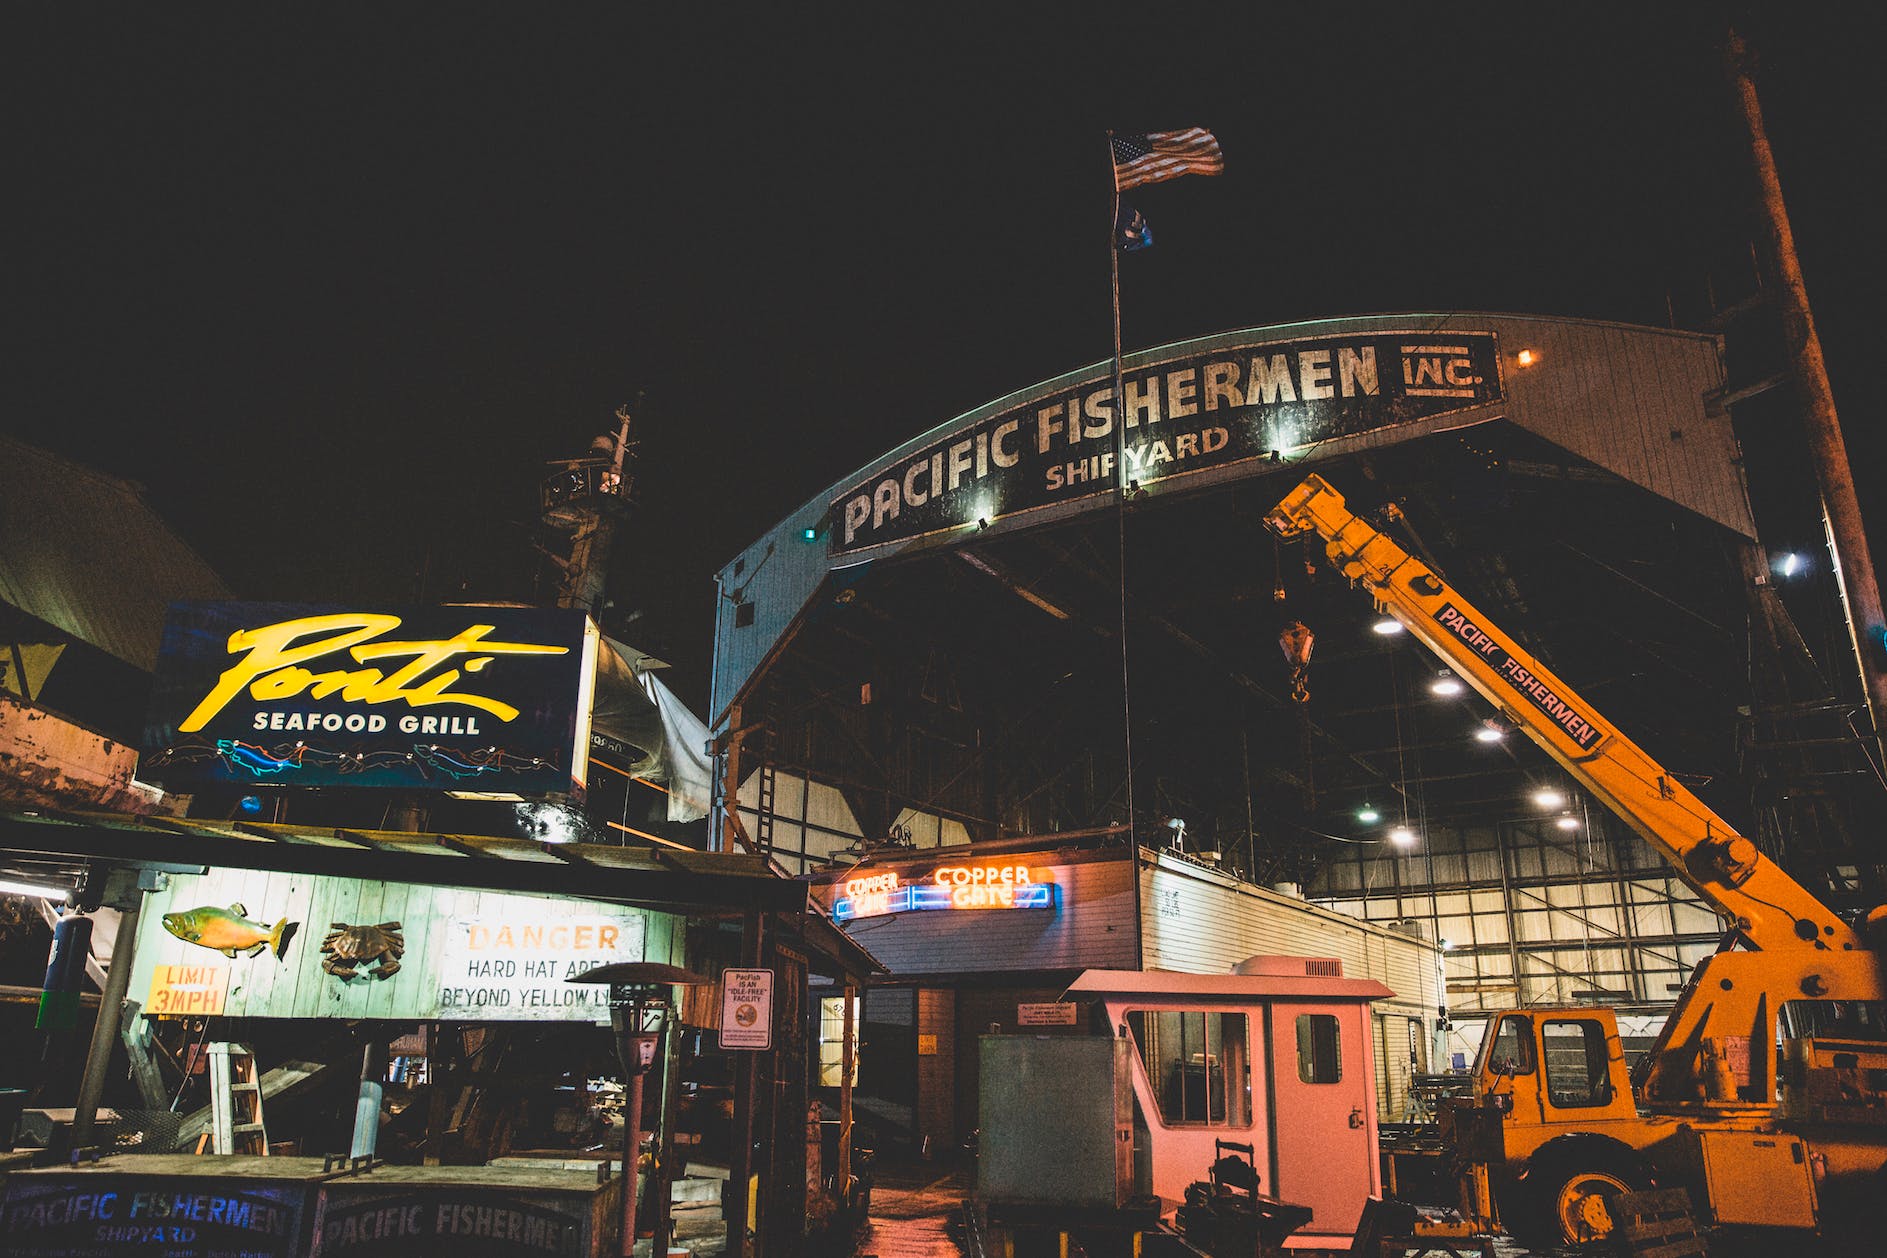 Wide angle image of the Pacific Fishermen Shipyard at night, with neon signs and spotlights illuminating the structures. An American flag at full mast sits on a flag pole in the background.